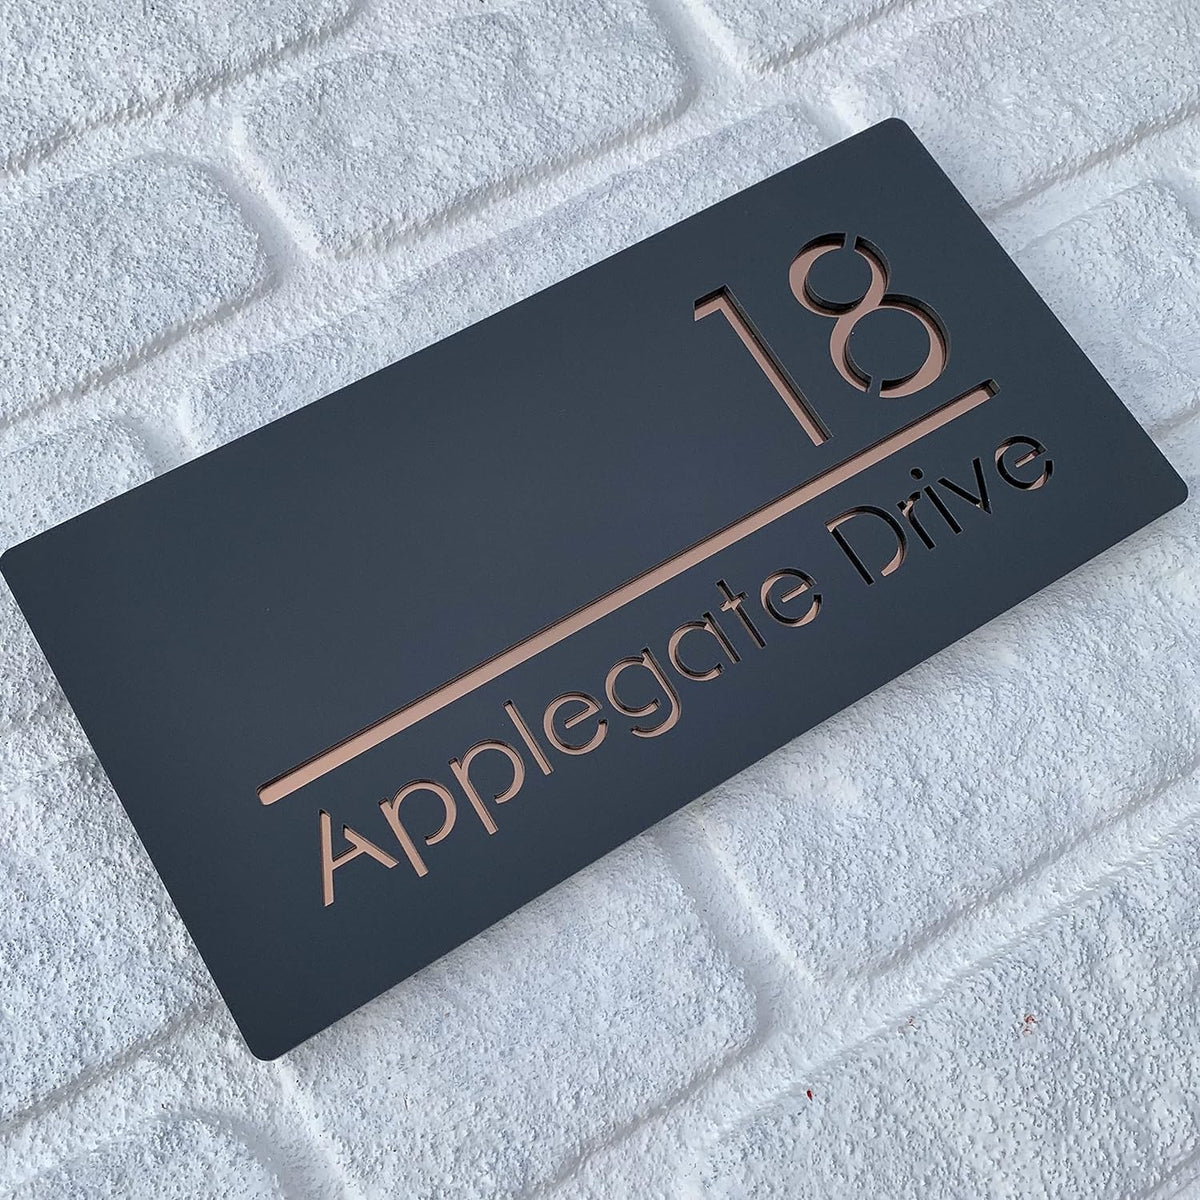 Name plate for home entrance | Door name plates | Wood Personalized Name Plate with 3D Letters | | Name Plate For Home, Office & Outdoor Entrance | 15X30 cm | Gift (Design 1) - Haoser